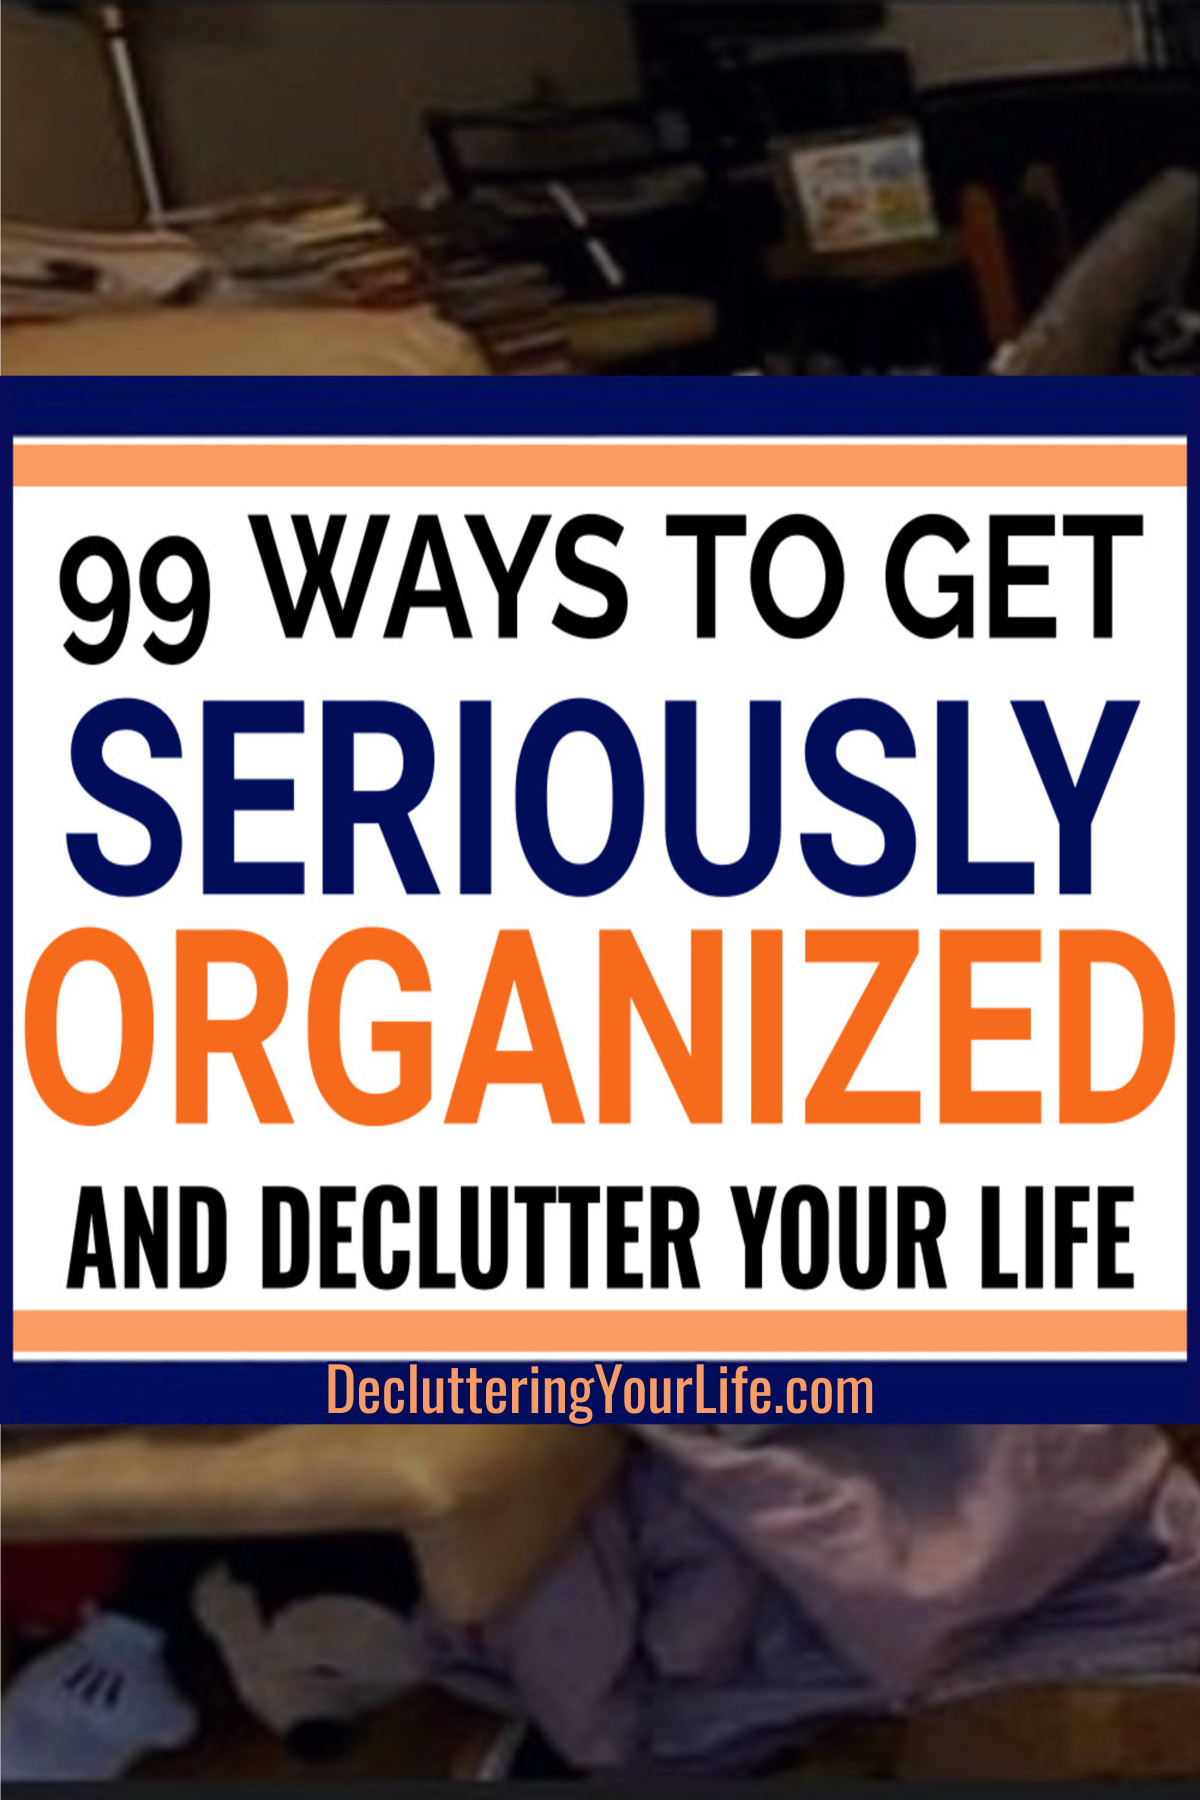 Get seriously organized